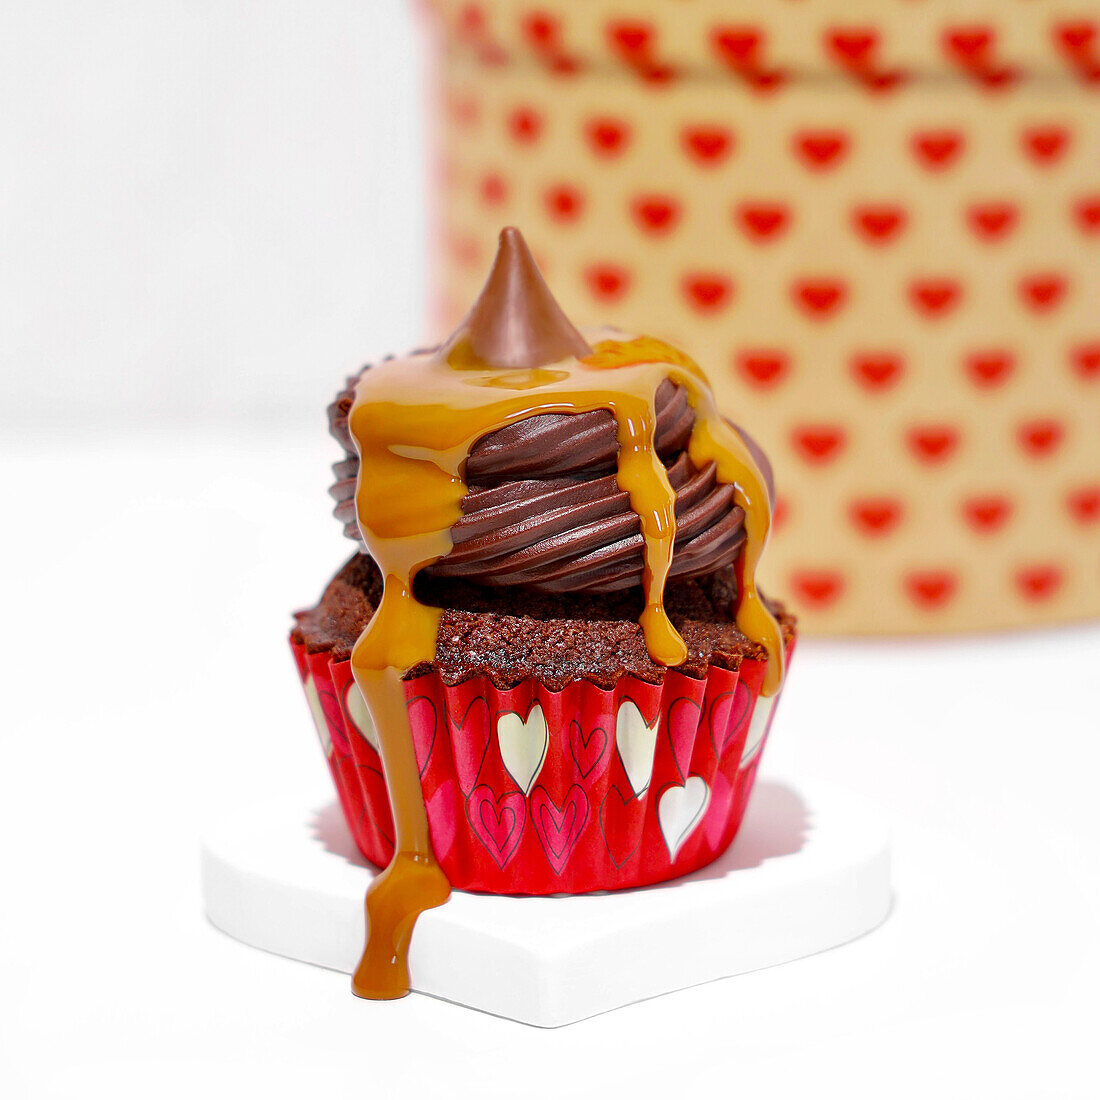 Chocolate cupcake with toffee sauce on a white background